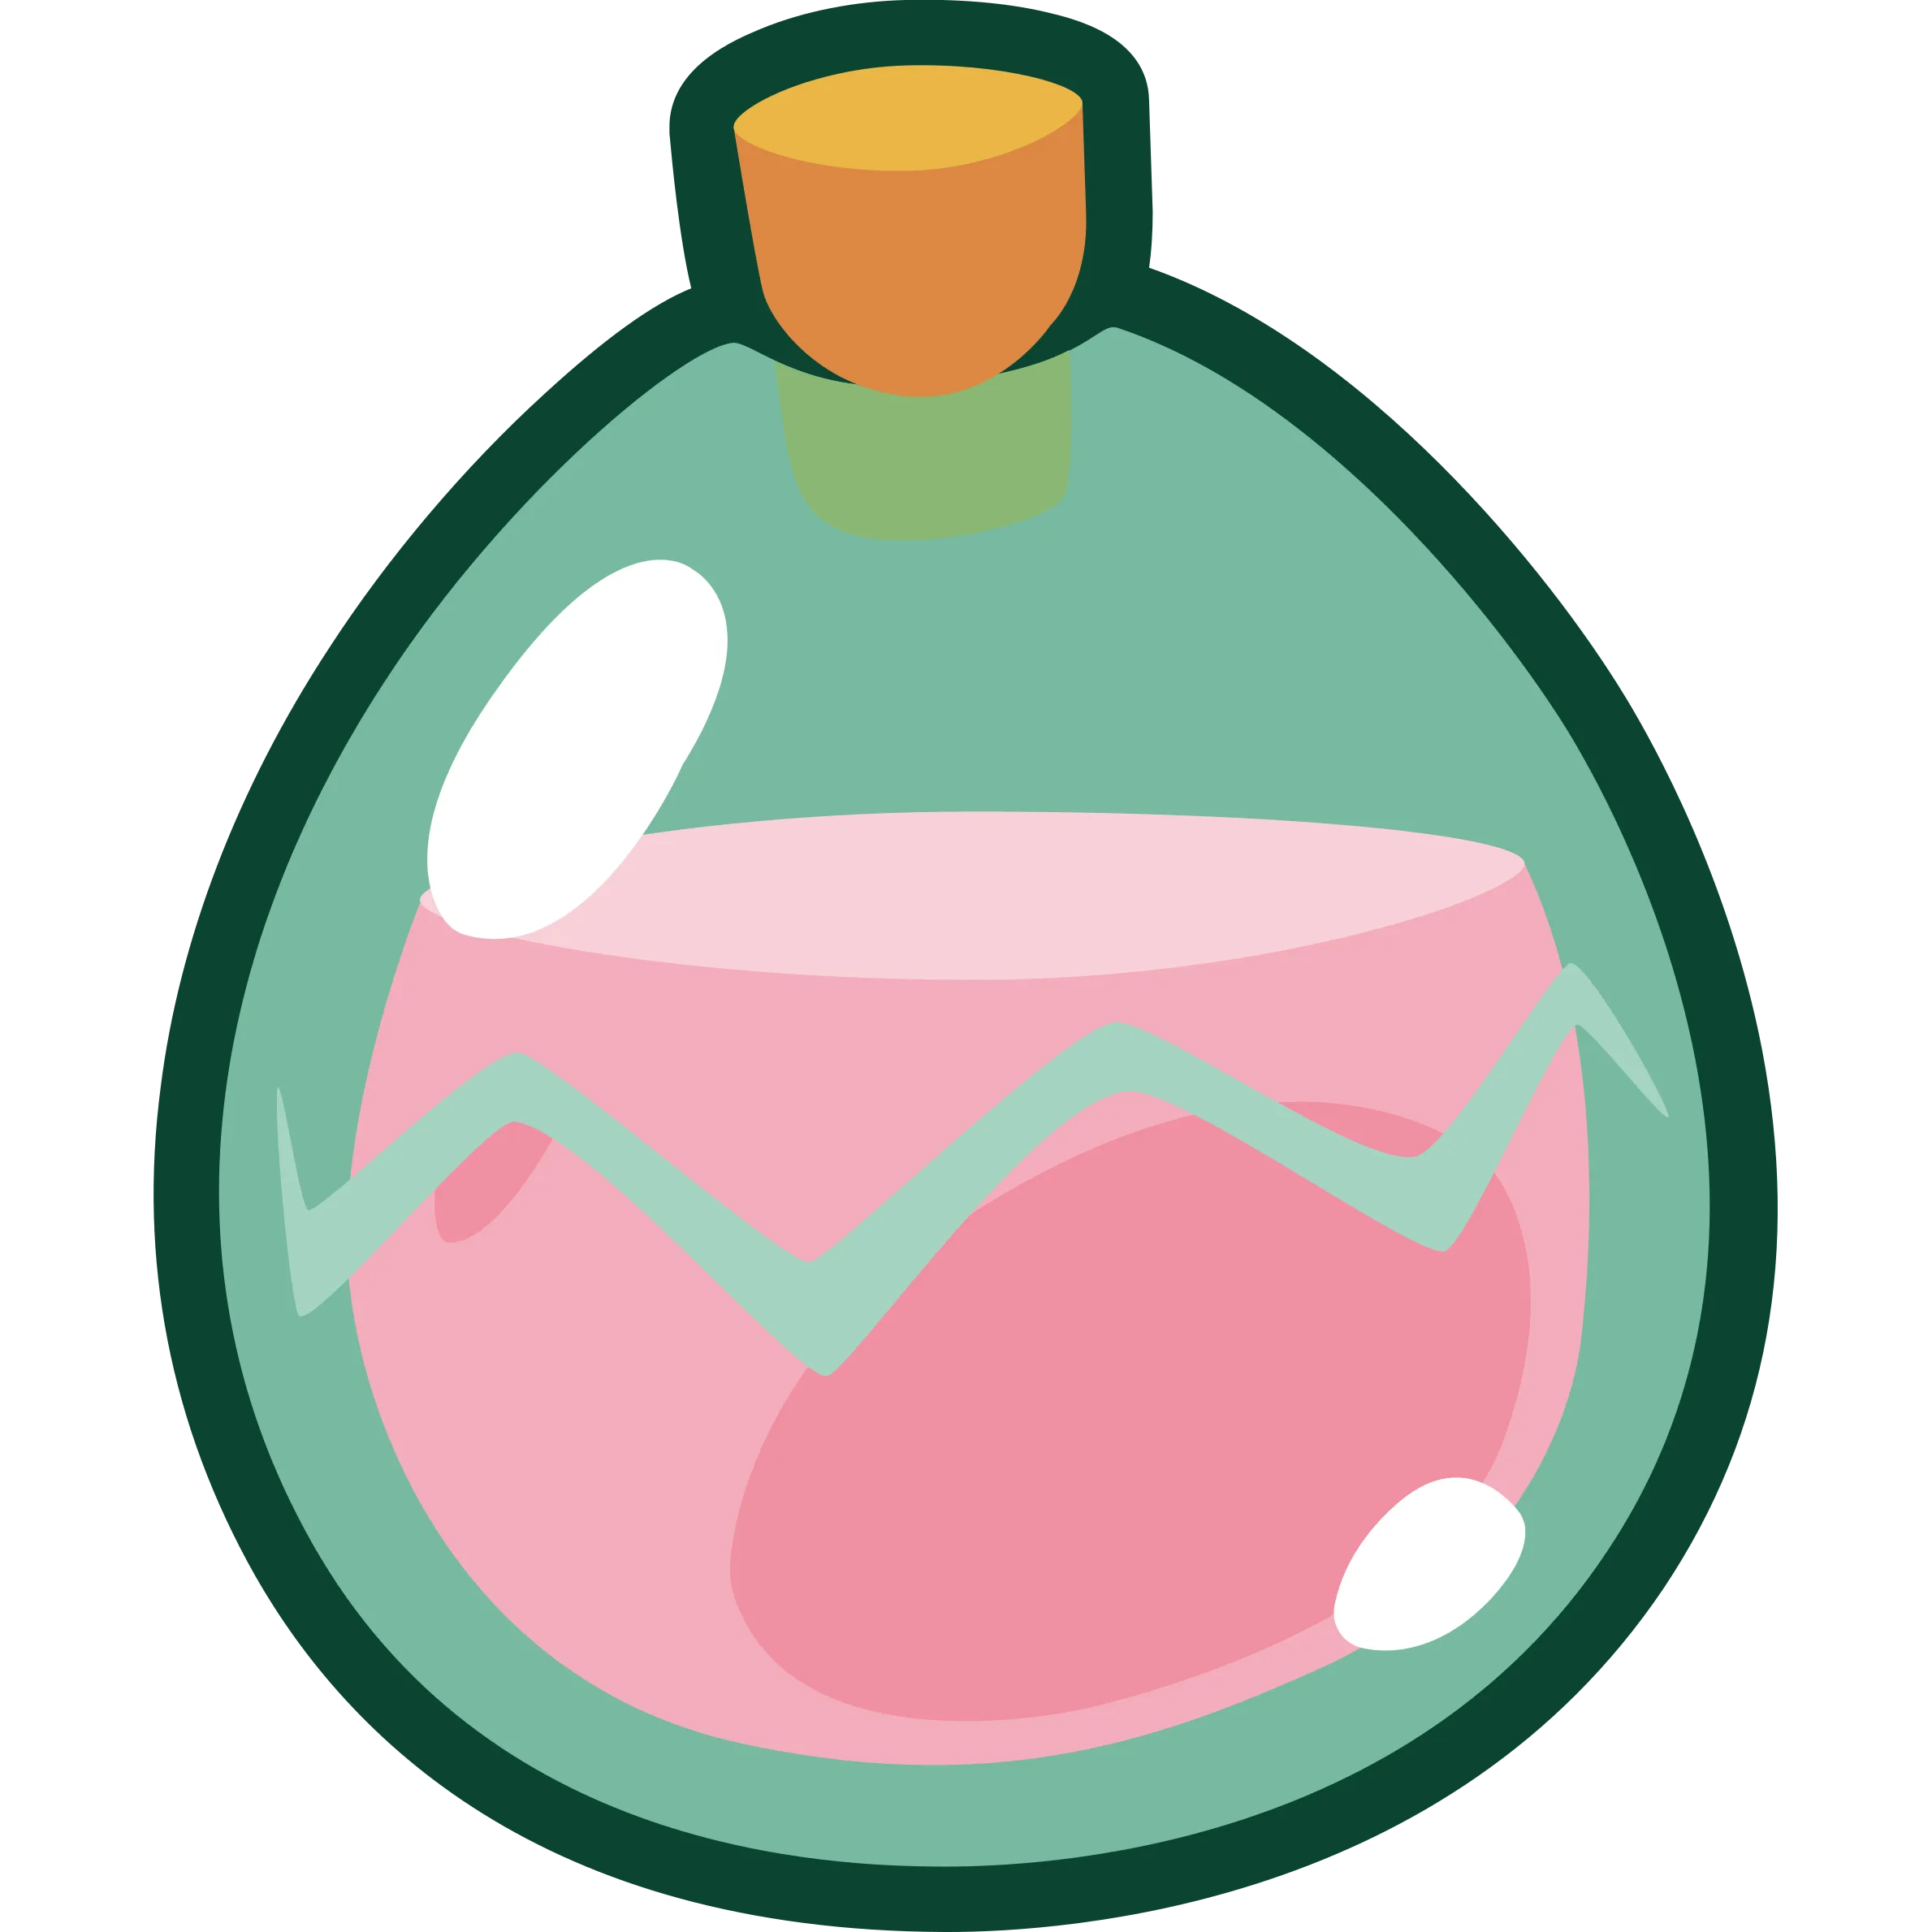 Smooth Love Potion logo in png format